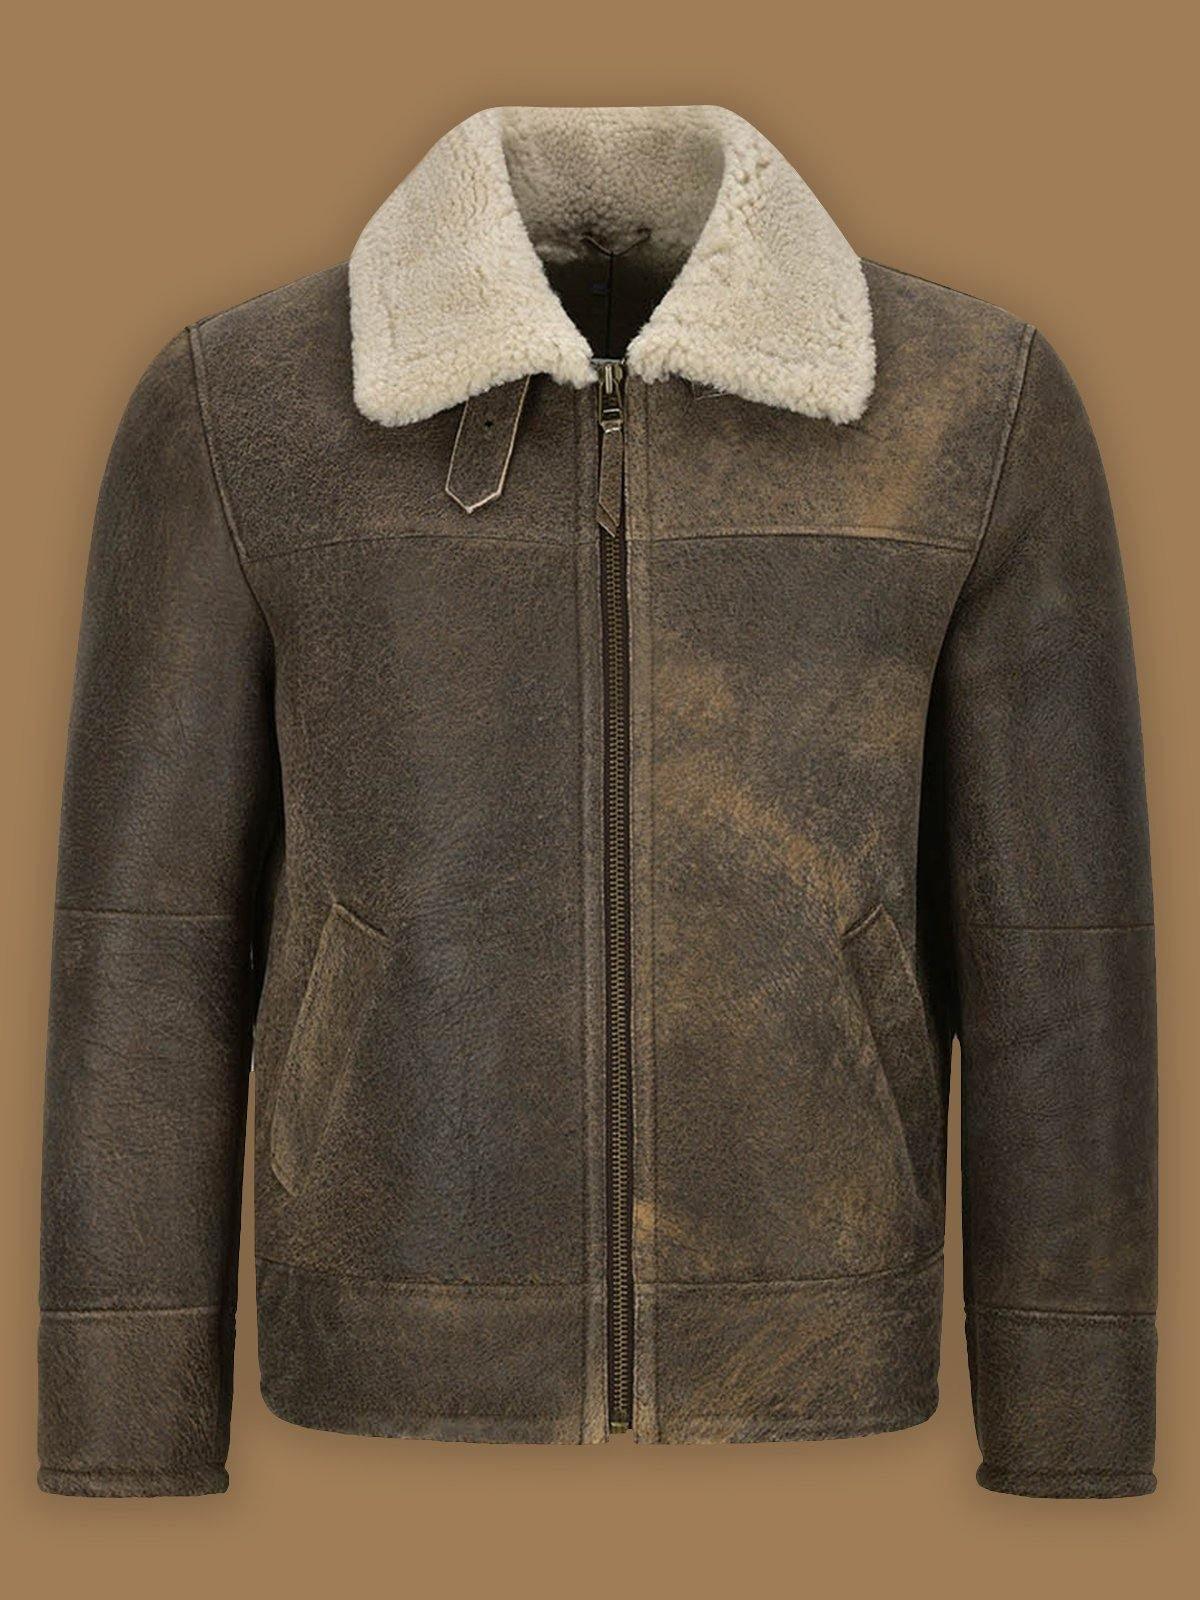 Men's Old Fashion Shearling Bomber Leather Jacket Brown